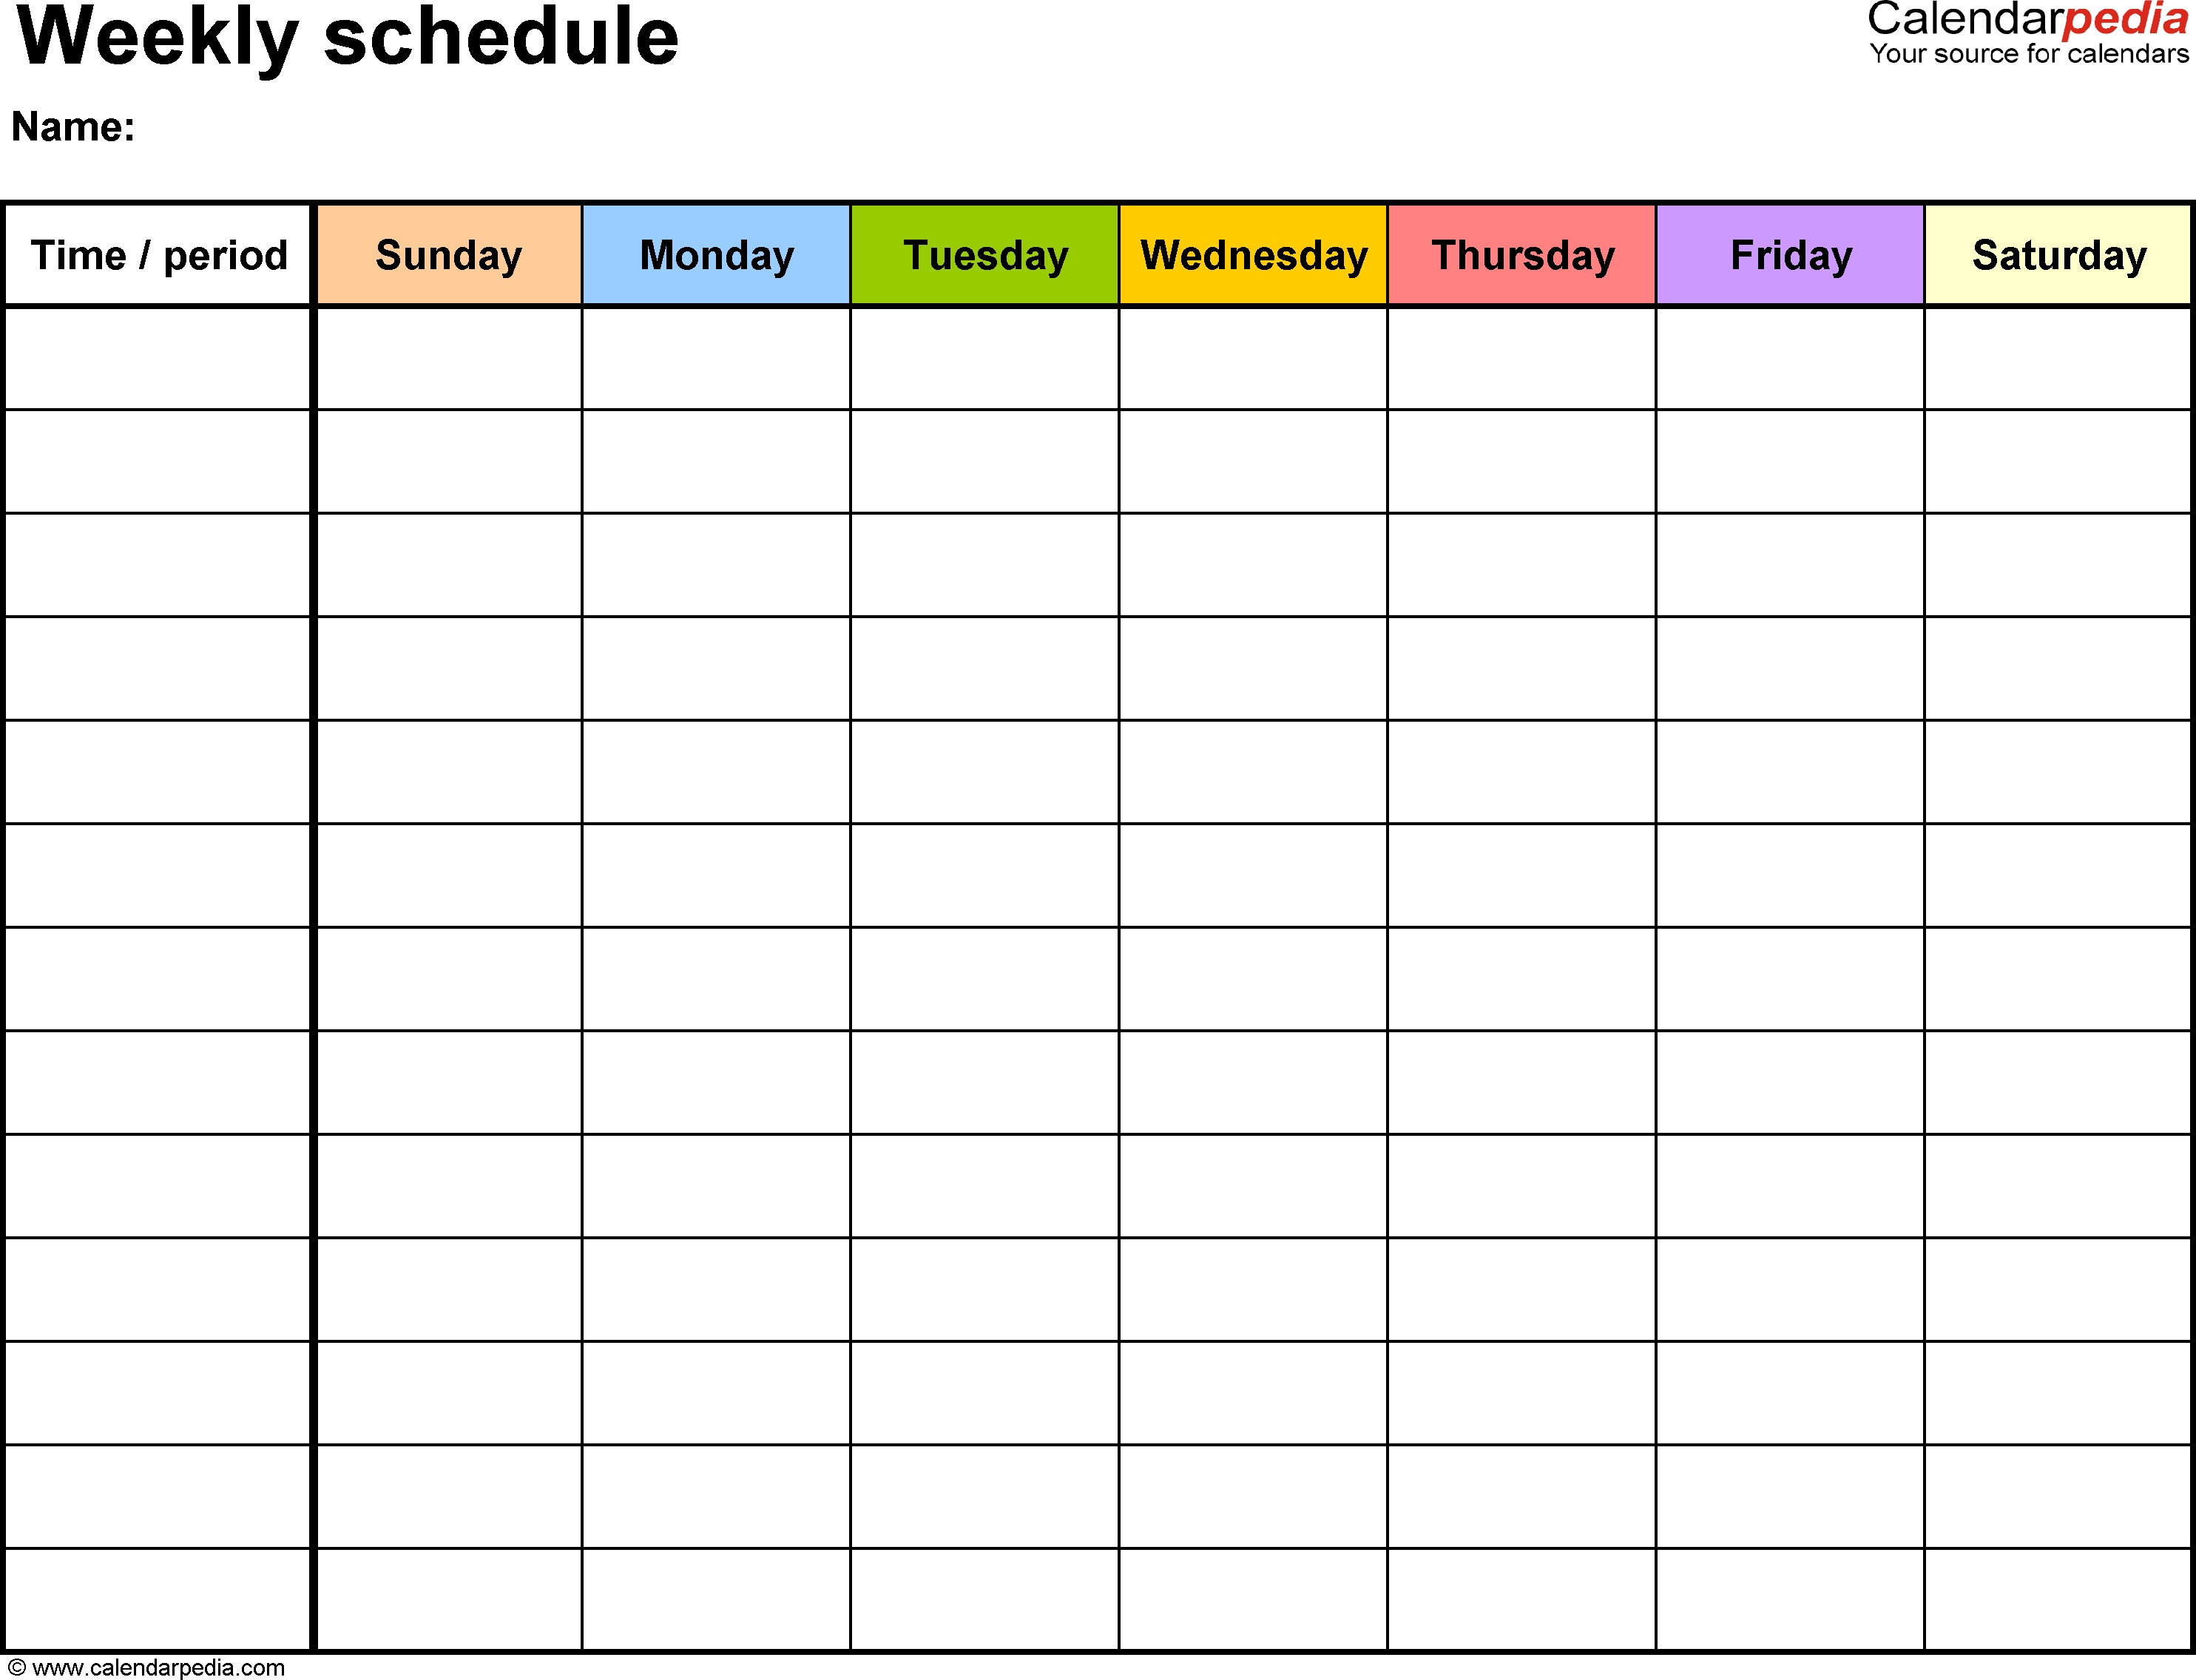 Weekly Calendar Template Monday Friday - Yeniscale.co  Printable Pick Up Schedule Template